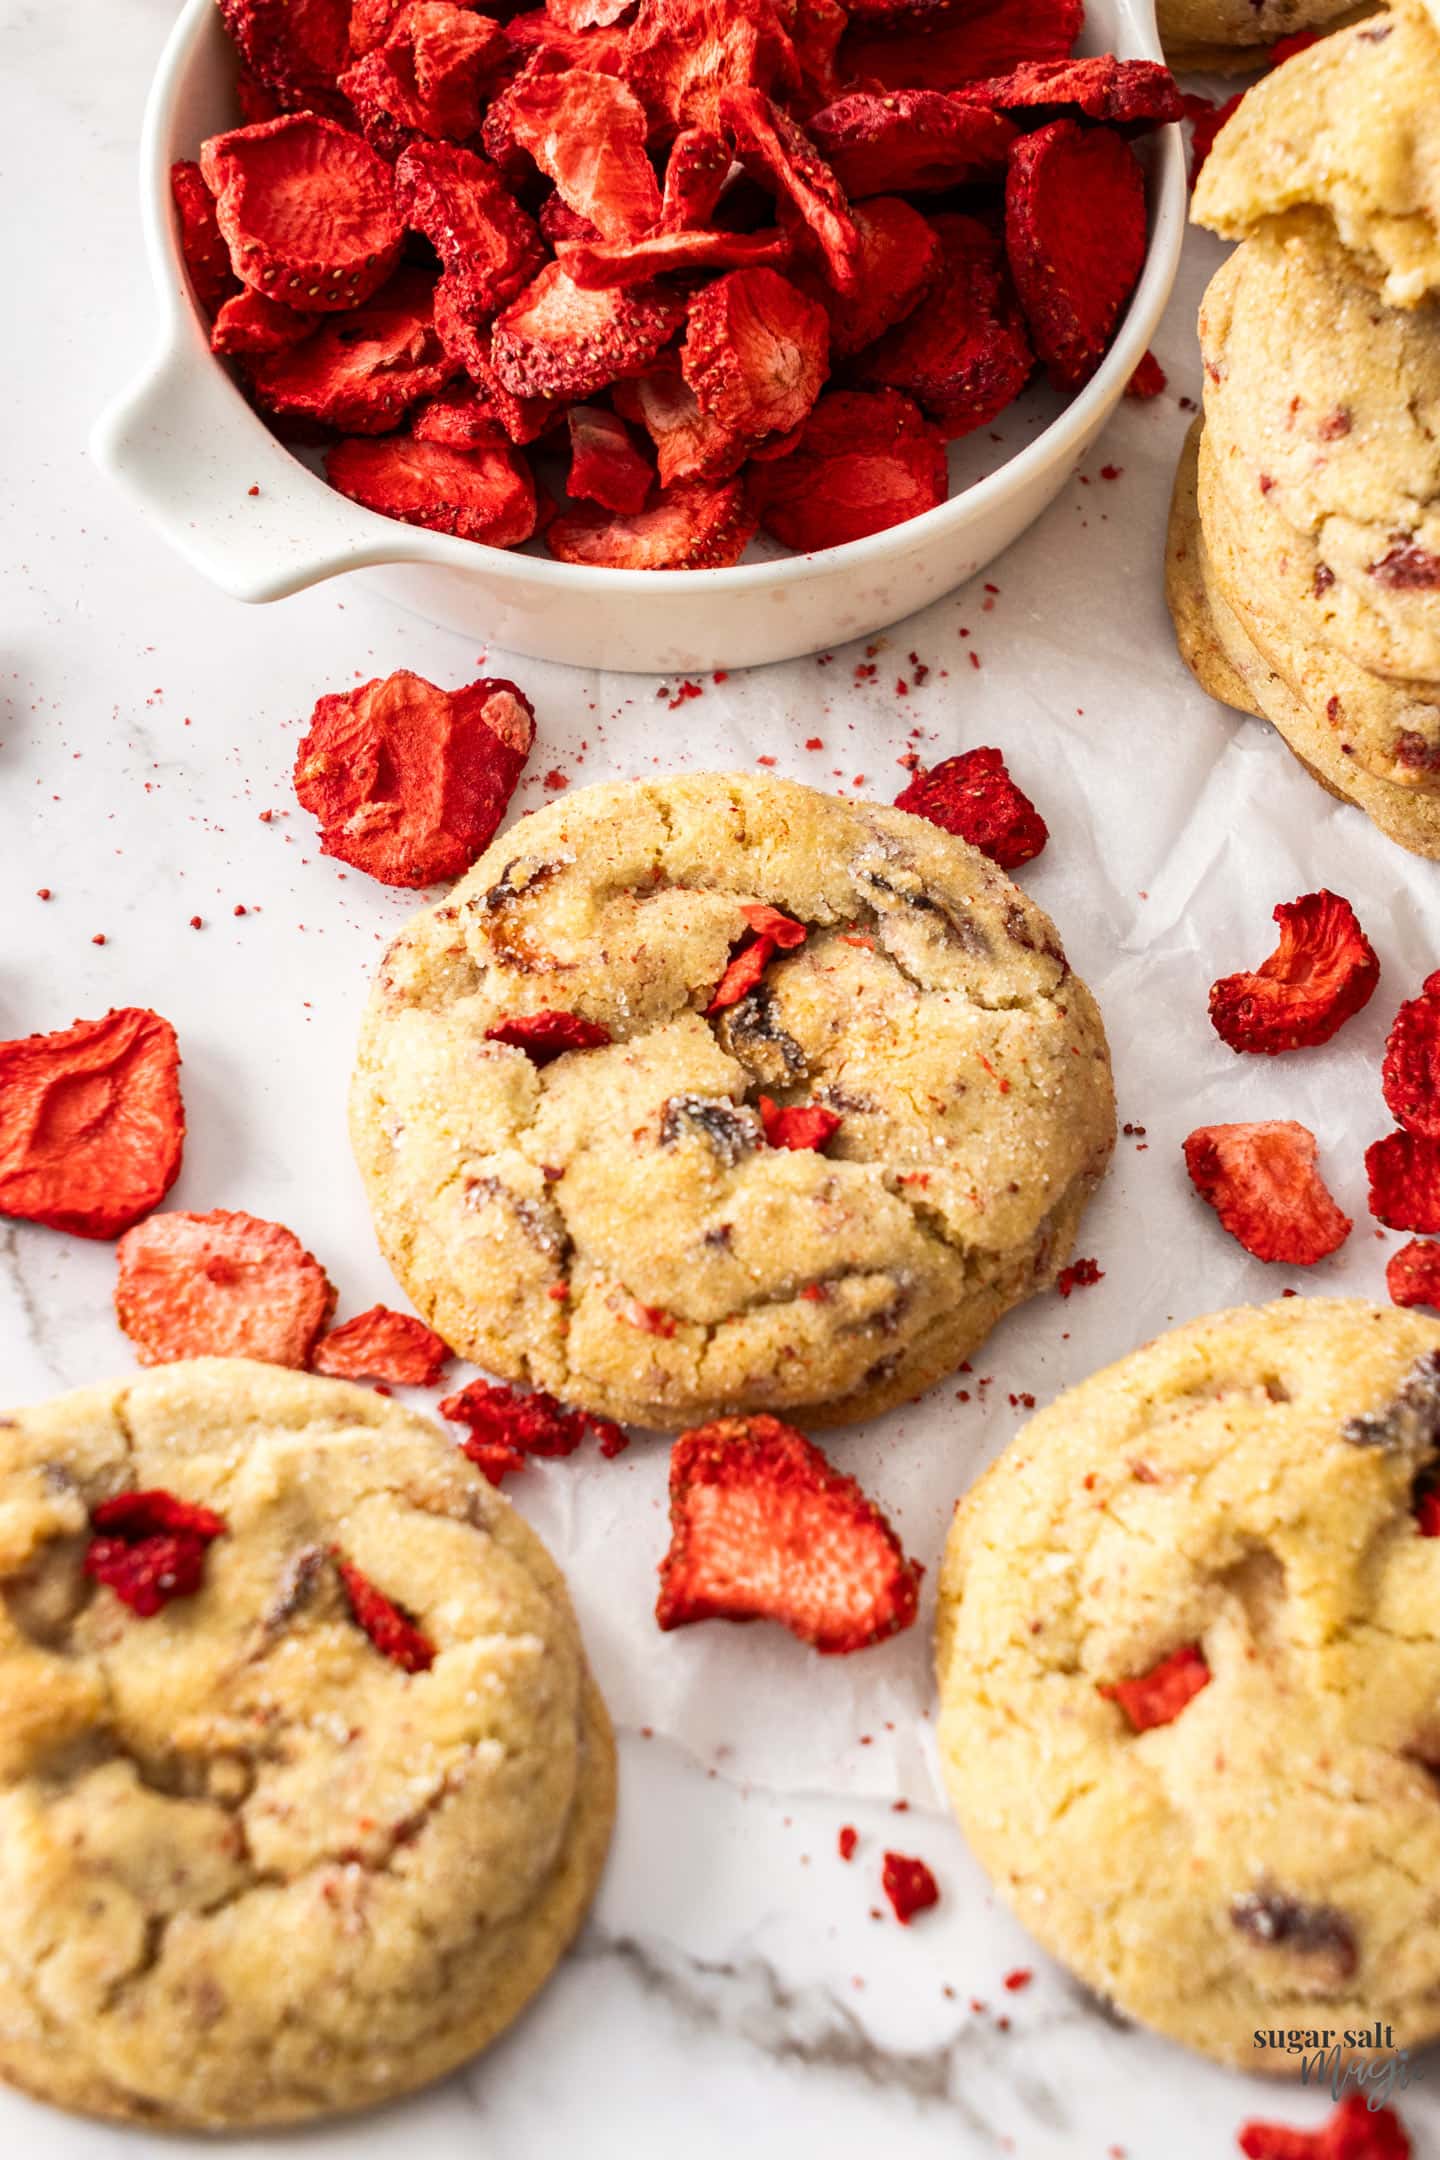 A strawberry cookie surrounded by freeze dried strawberries.